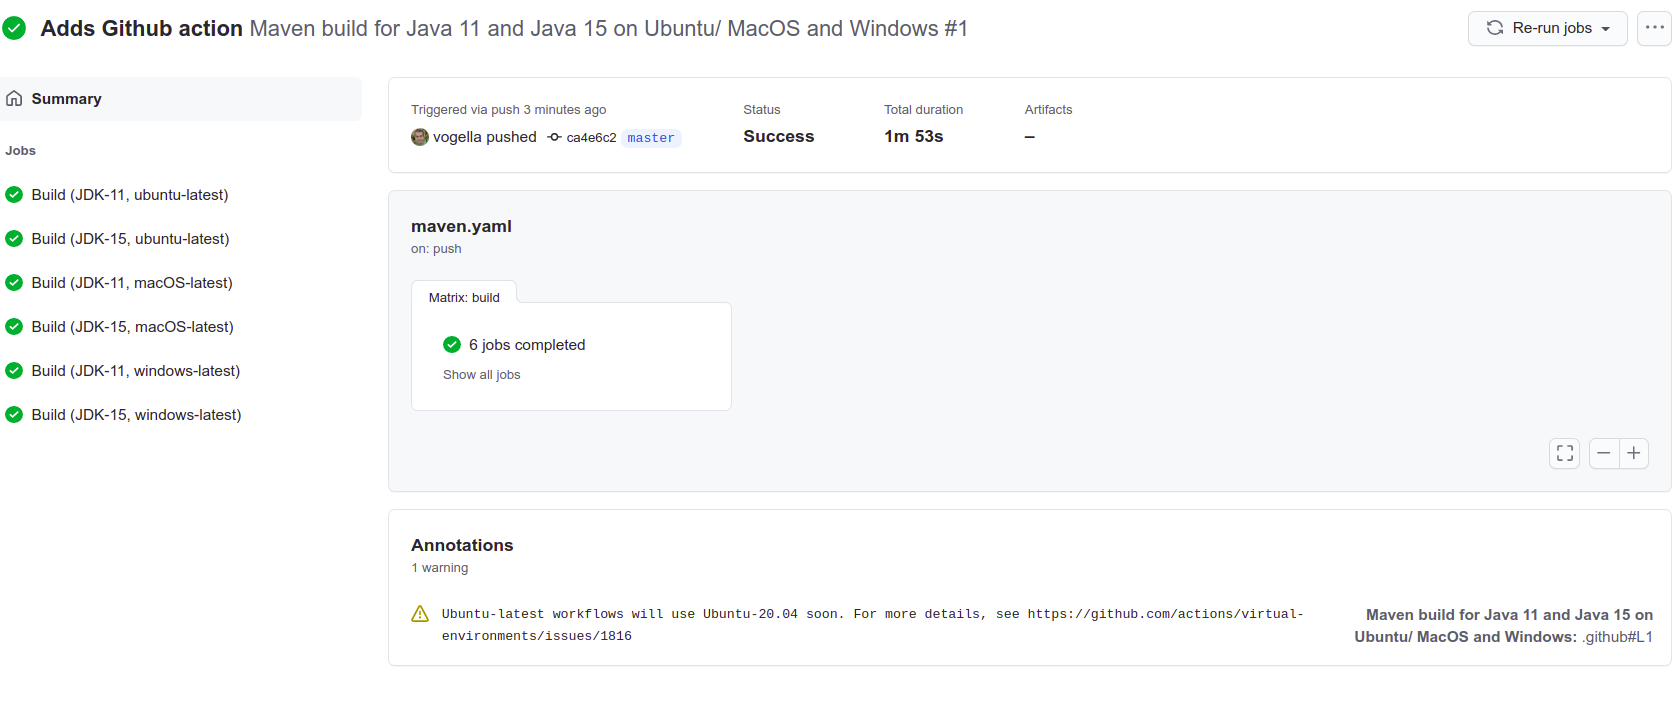 eclipse with maven free download for capiton mac